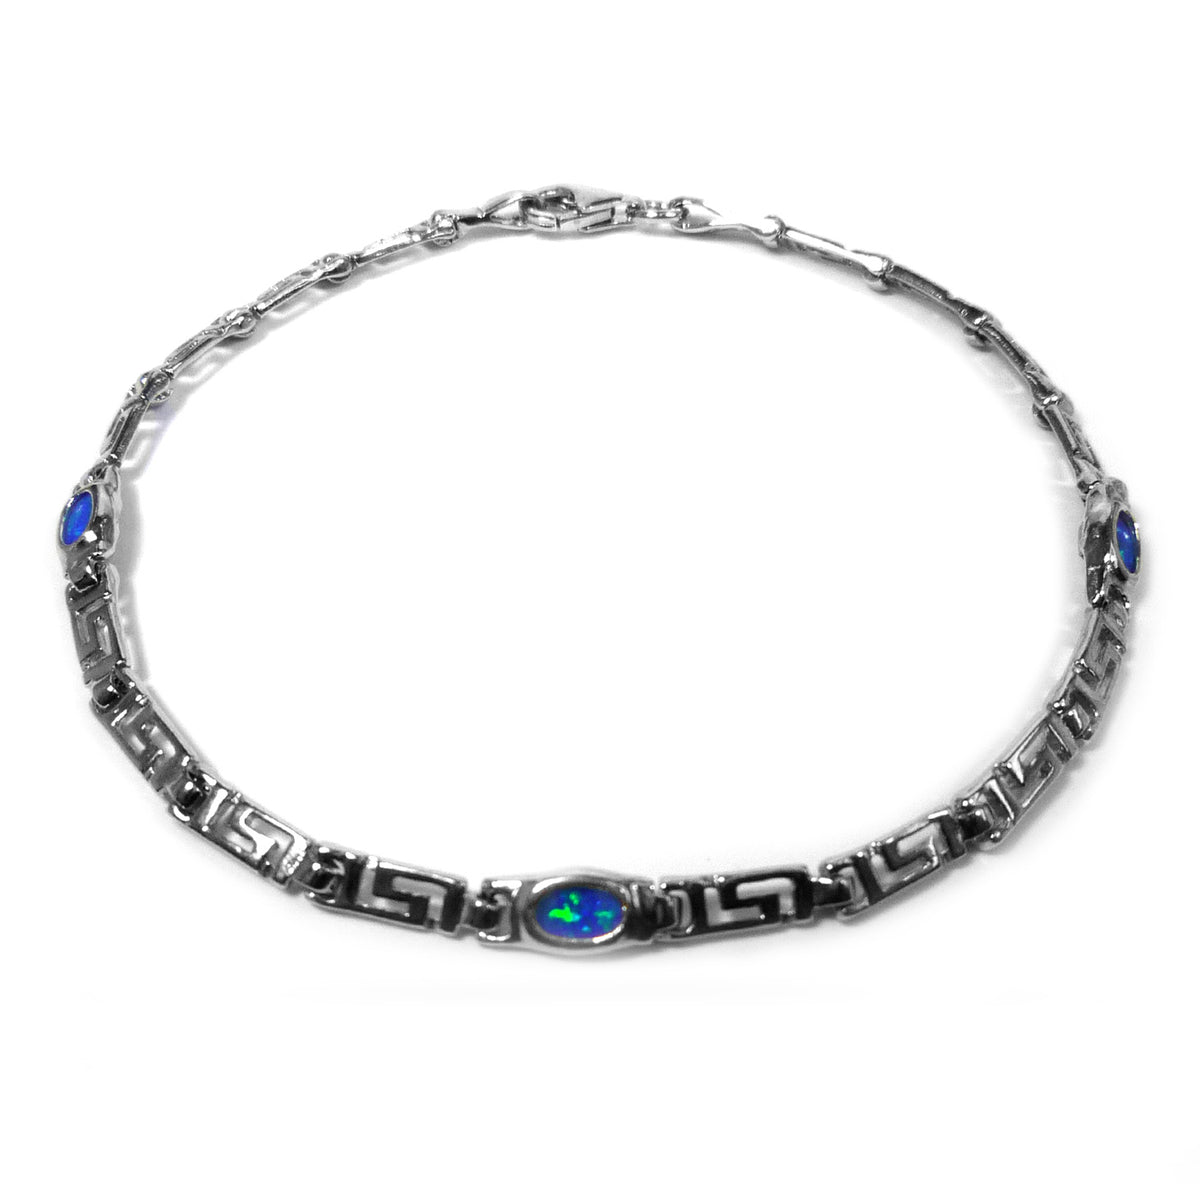 Sterling Silver Rhodium Plated Greek Key Bracelet and Synthetic Opal, 7.25" fine designer jewelry for men and women